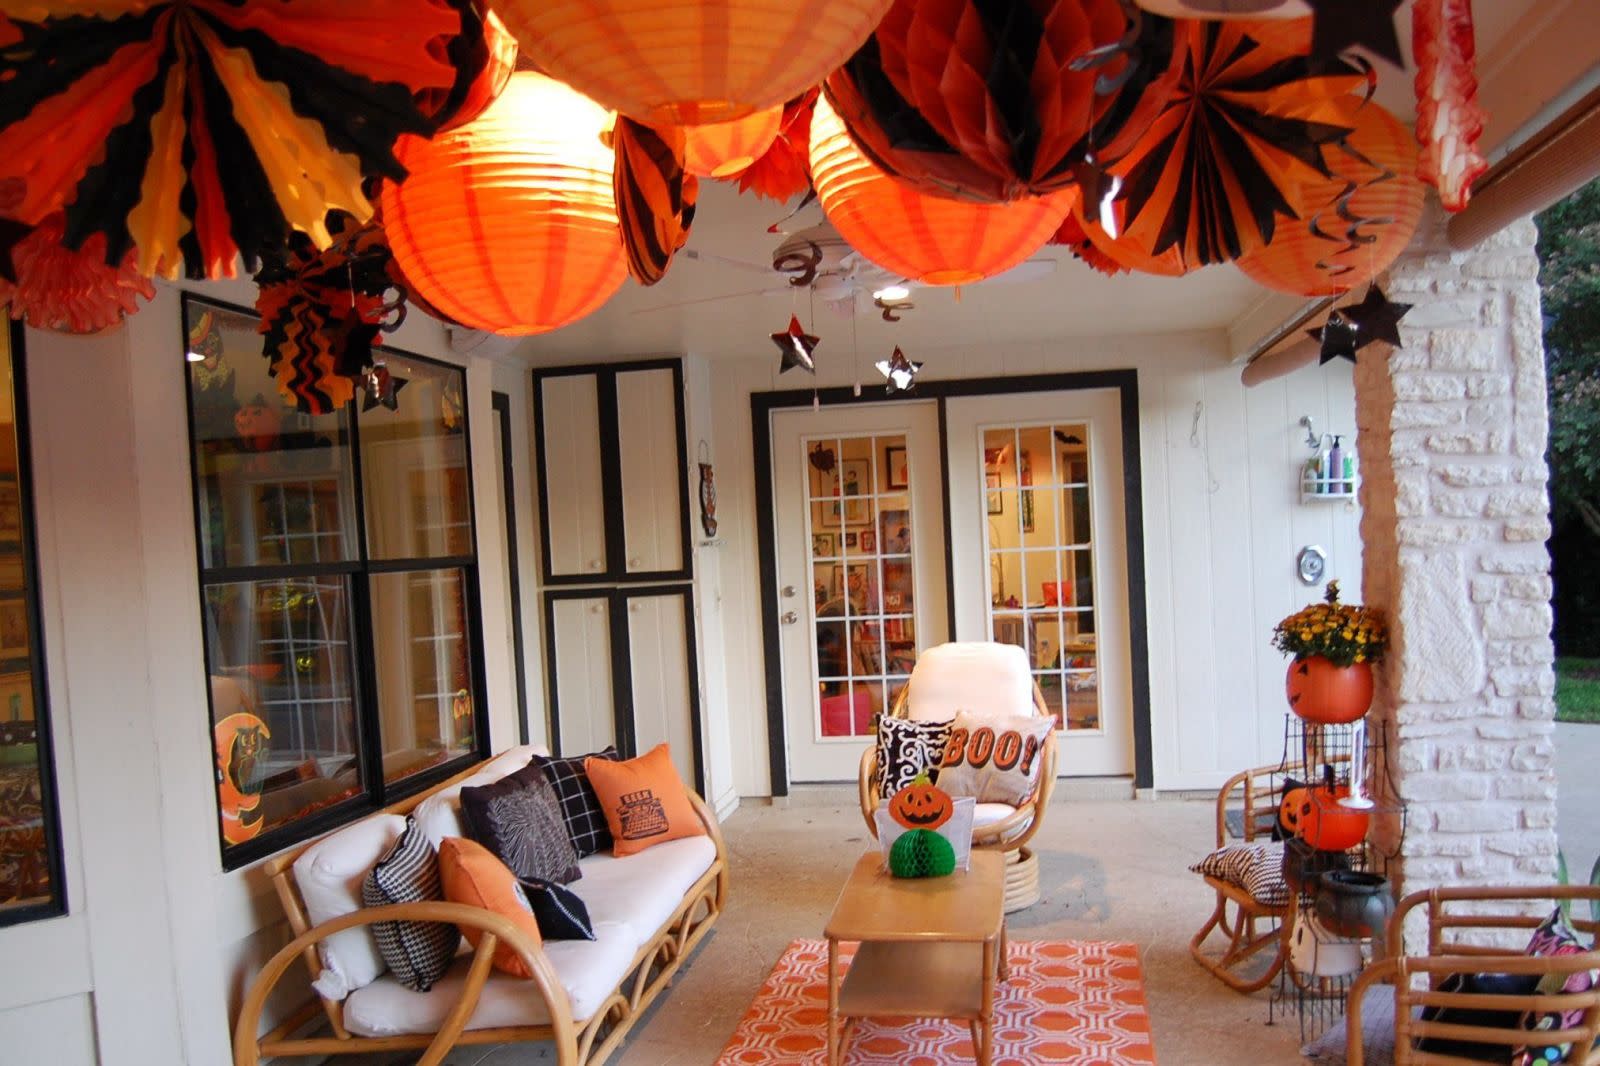 7 Decorating Ideas To Steal From The Queen Of Halloween